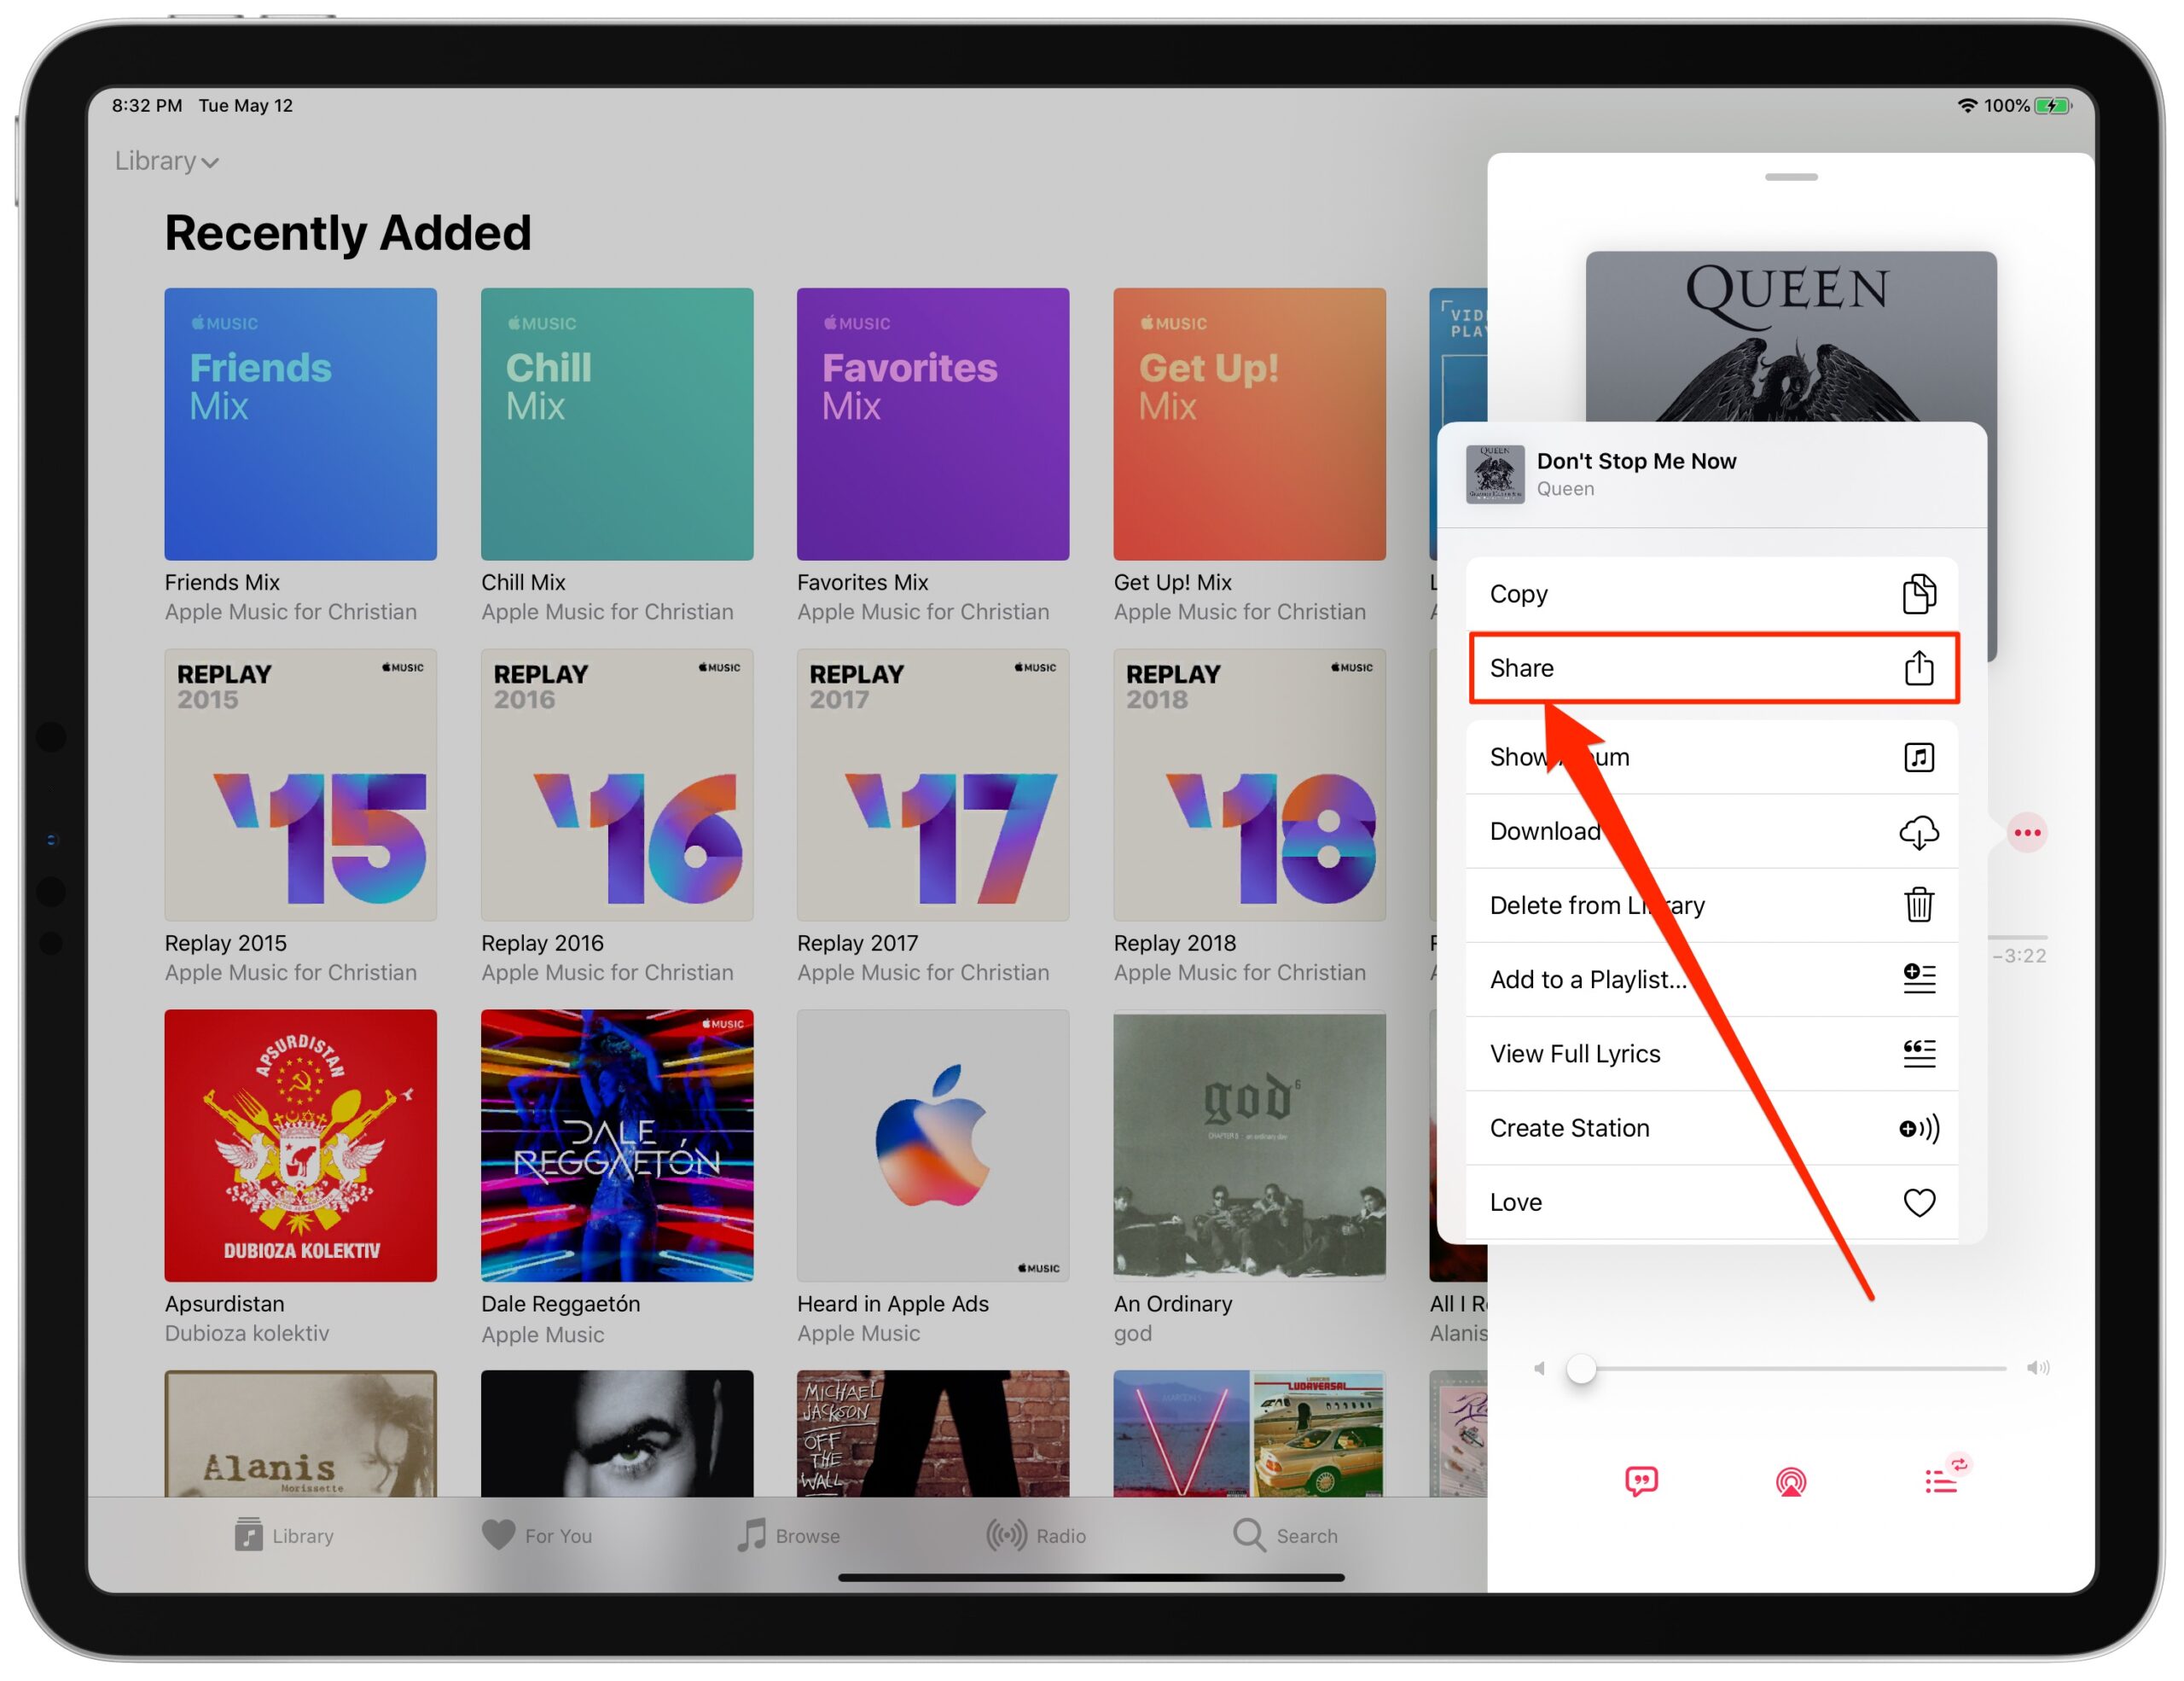 How To Add Music To Multiple Instagram Stories from Apple Music